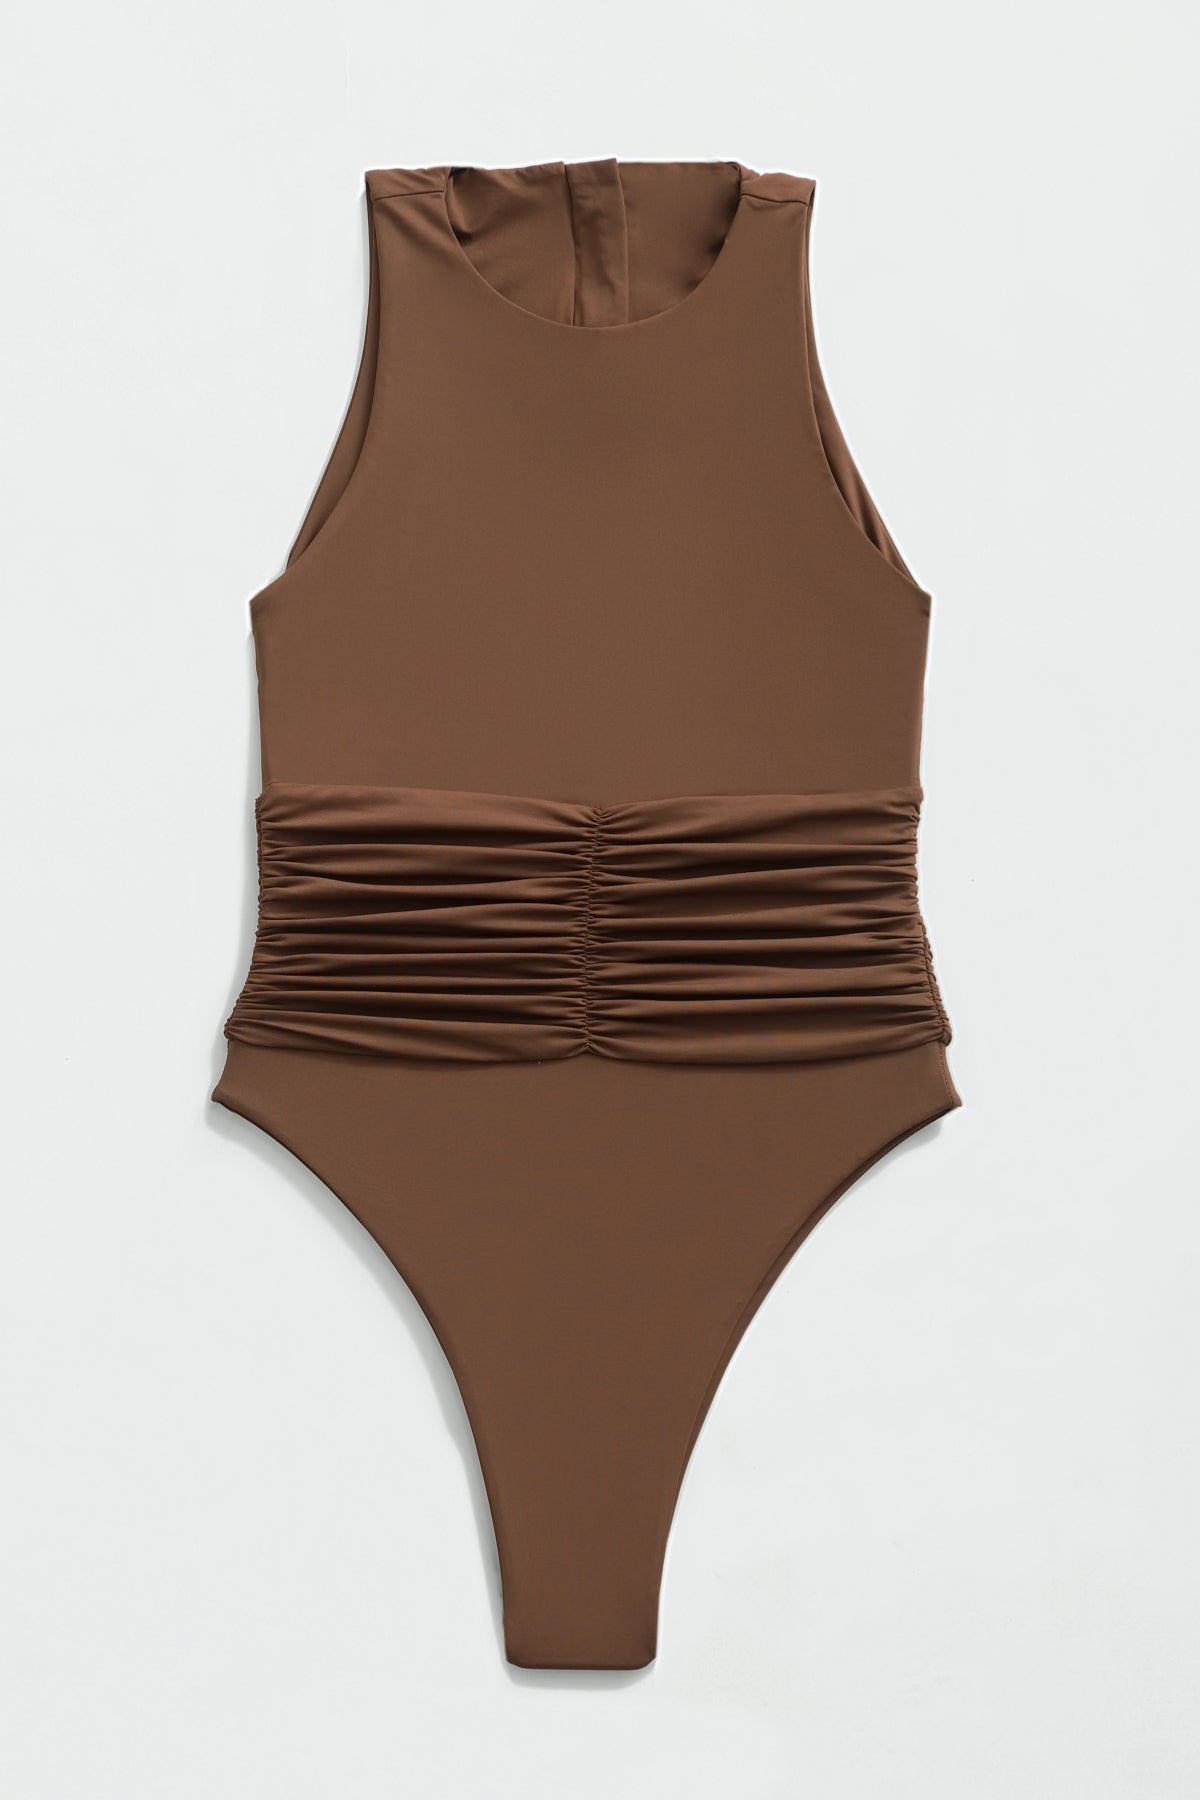 Jace One-Piece Moderate Coverage - Chocolate